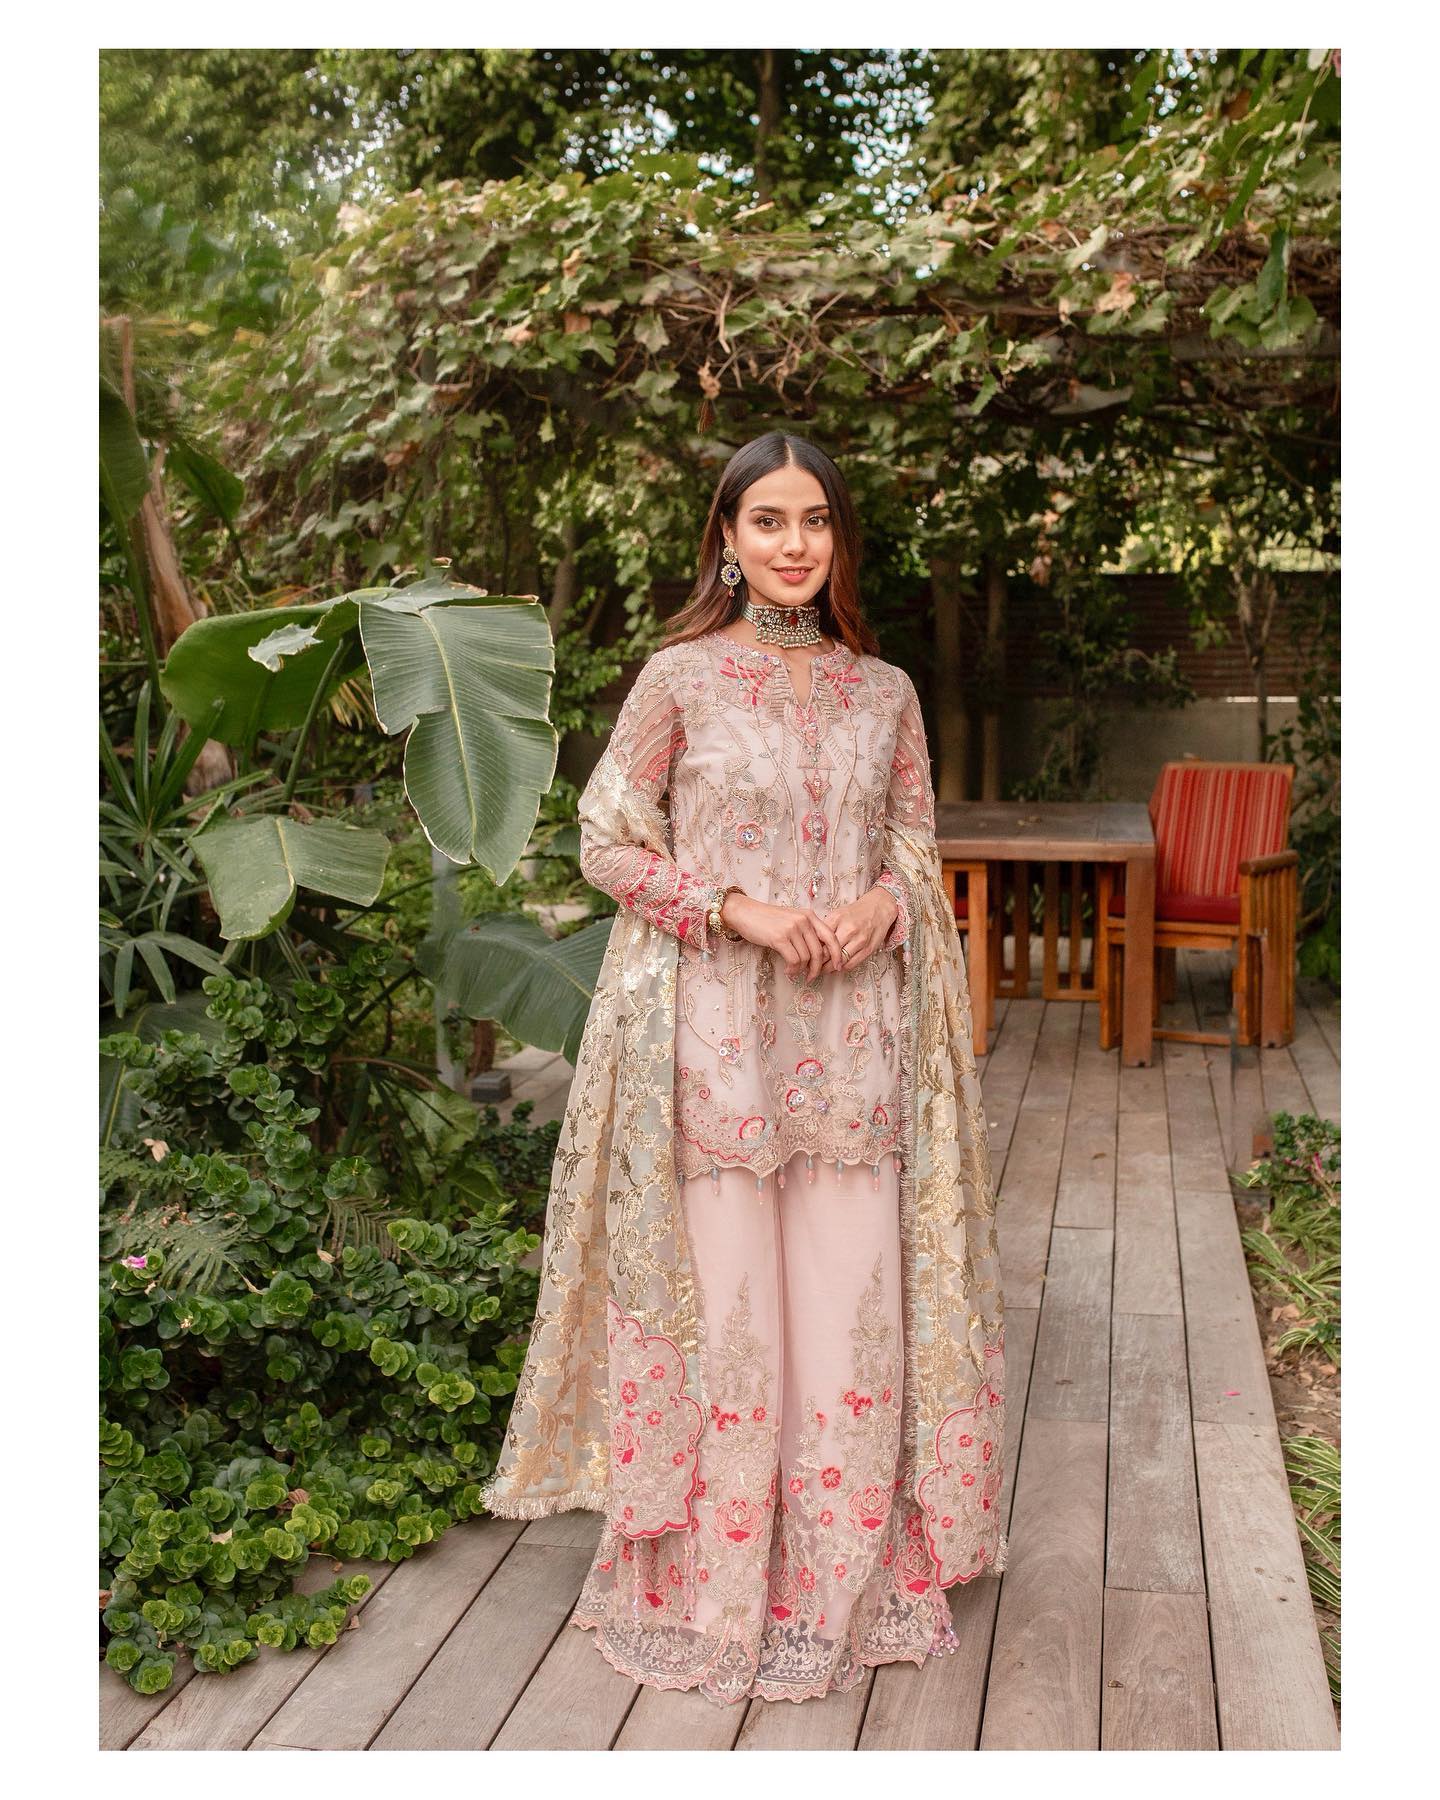 Iqra Aziz Outfits 17 of Iqra Azizs Best Dresses Ever